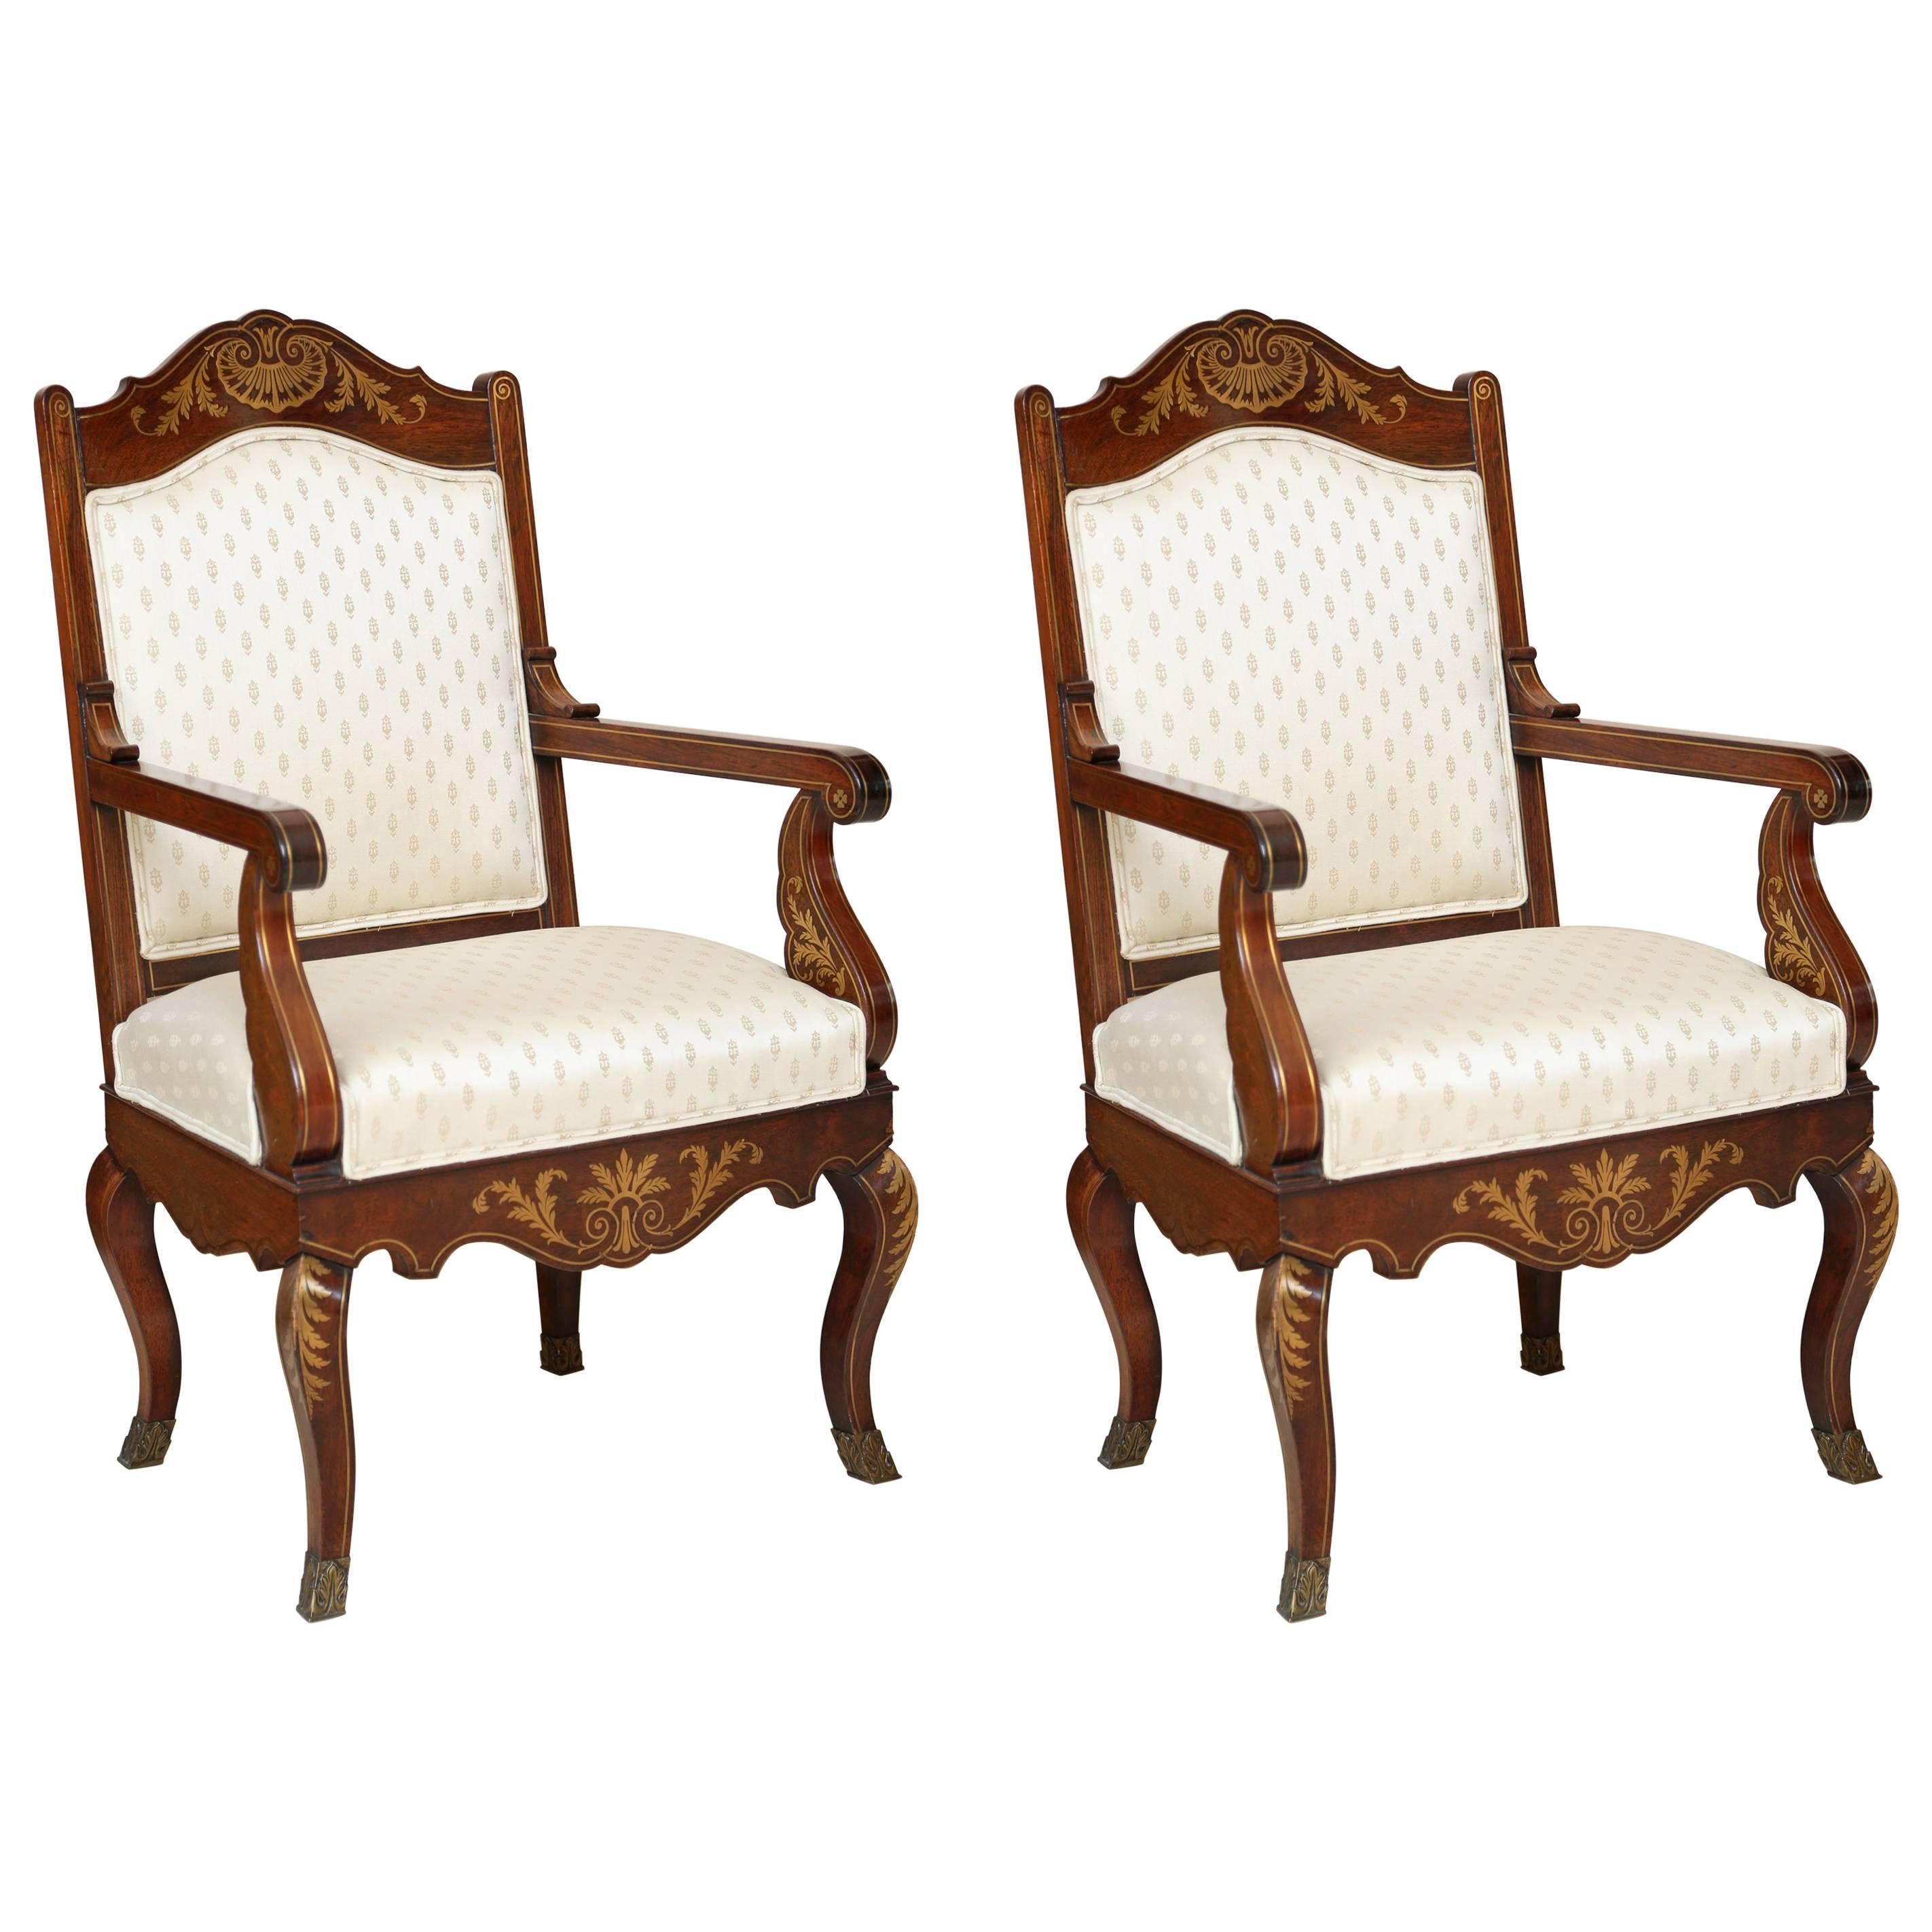 Pair of William IV Rosewood and Brass-Inlaid Armchairs